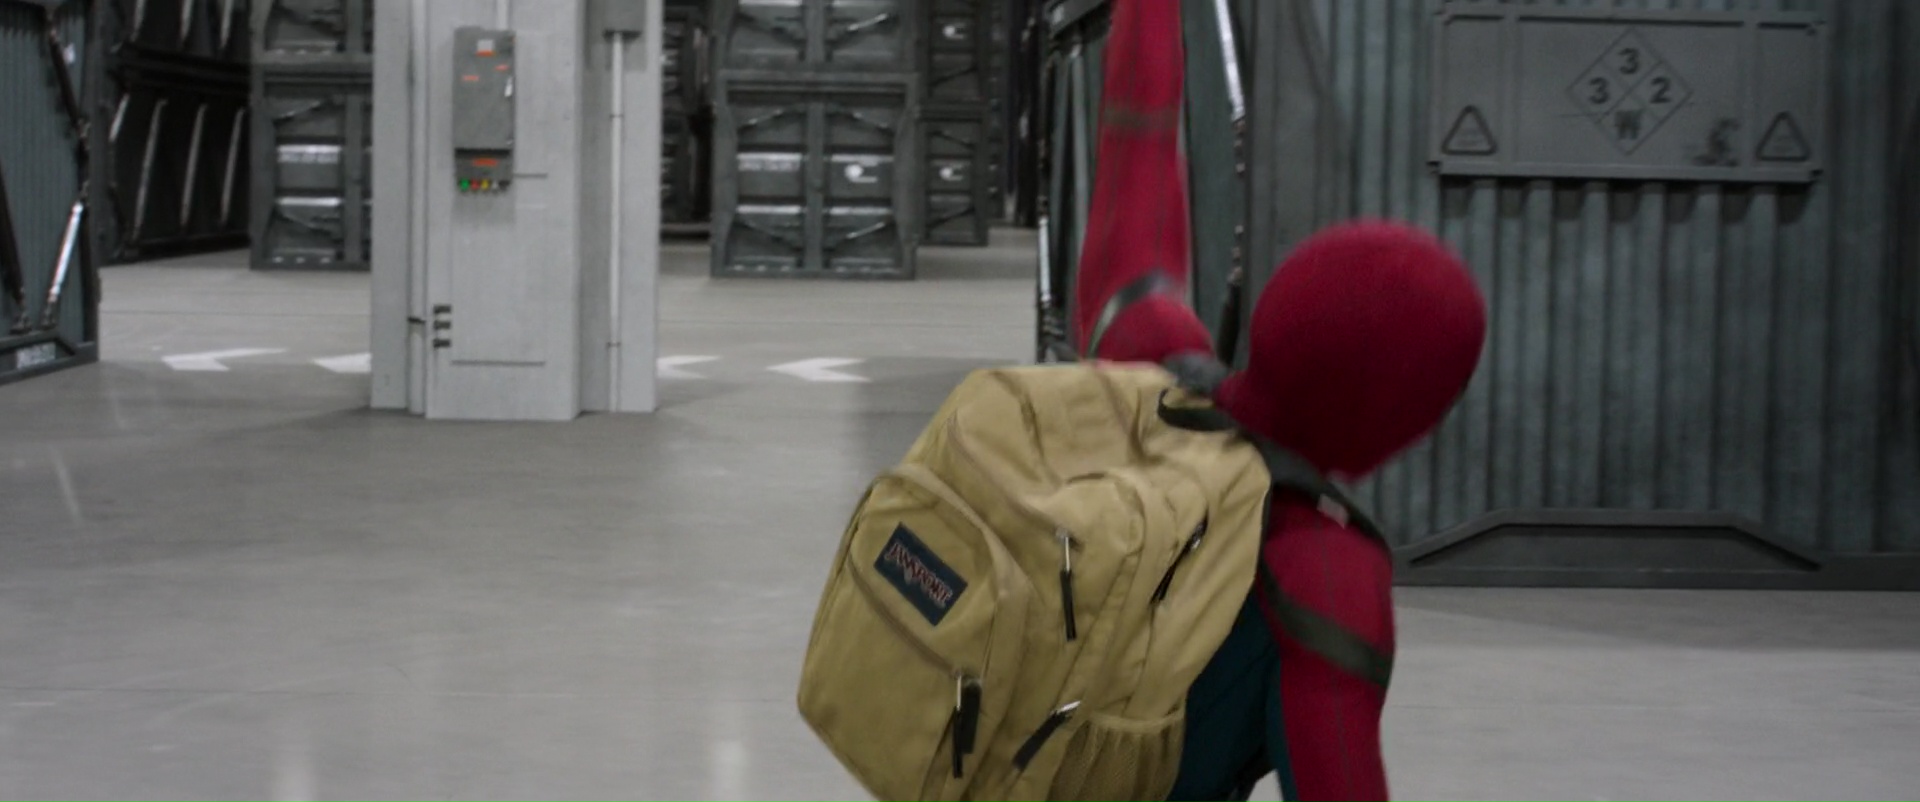 JanSport Backpack Worn by Tom Holland in Spider-Man: Homecoming (2017) Movie